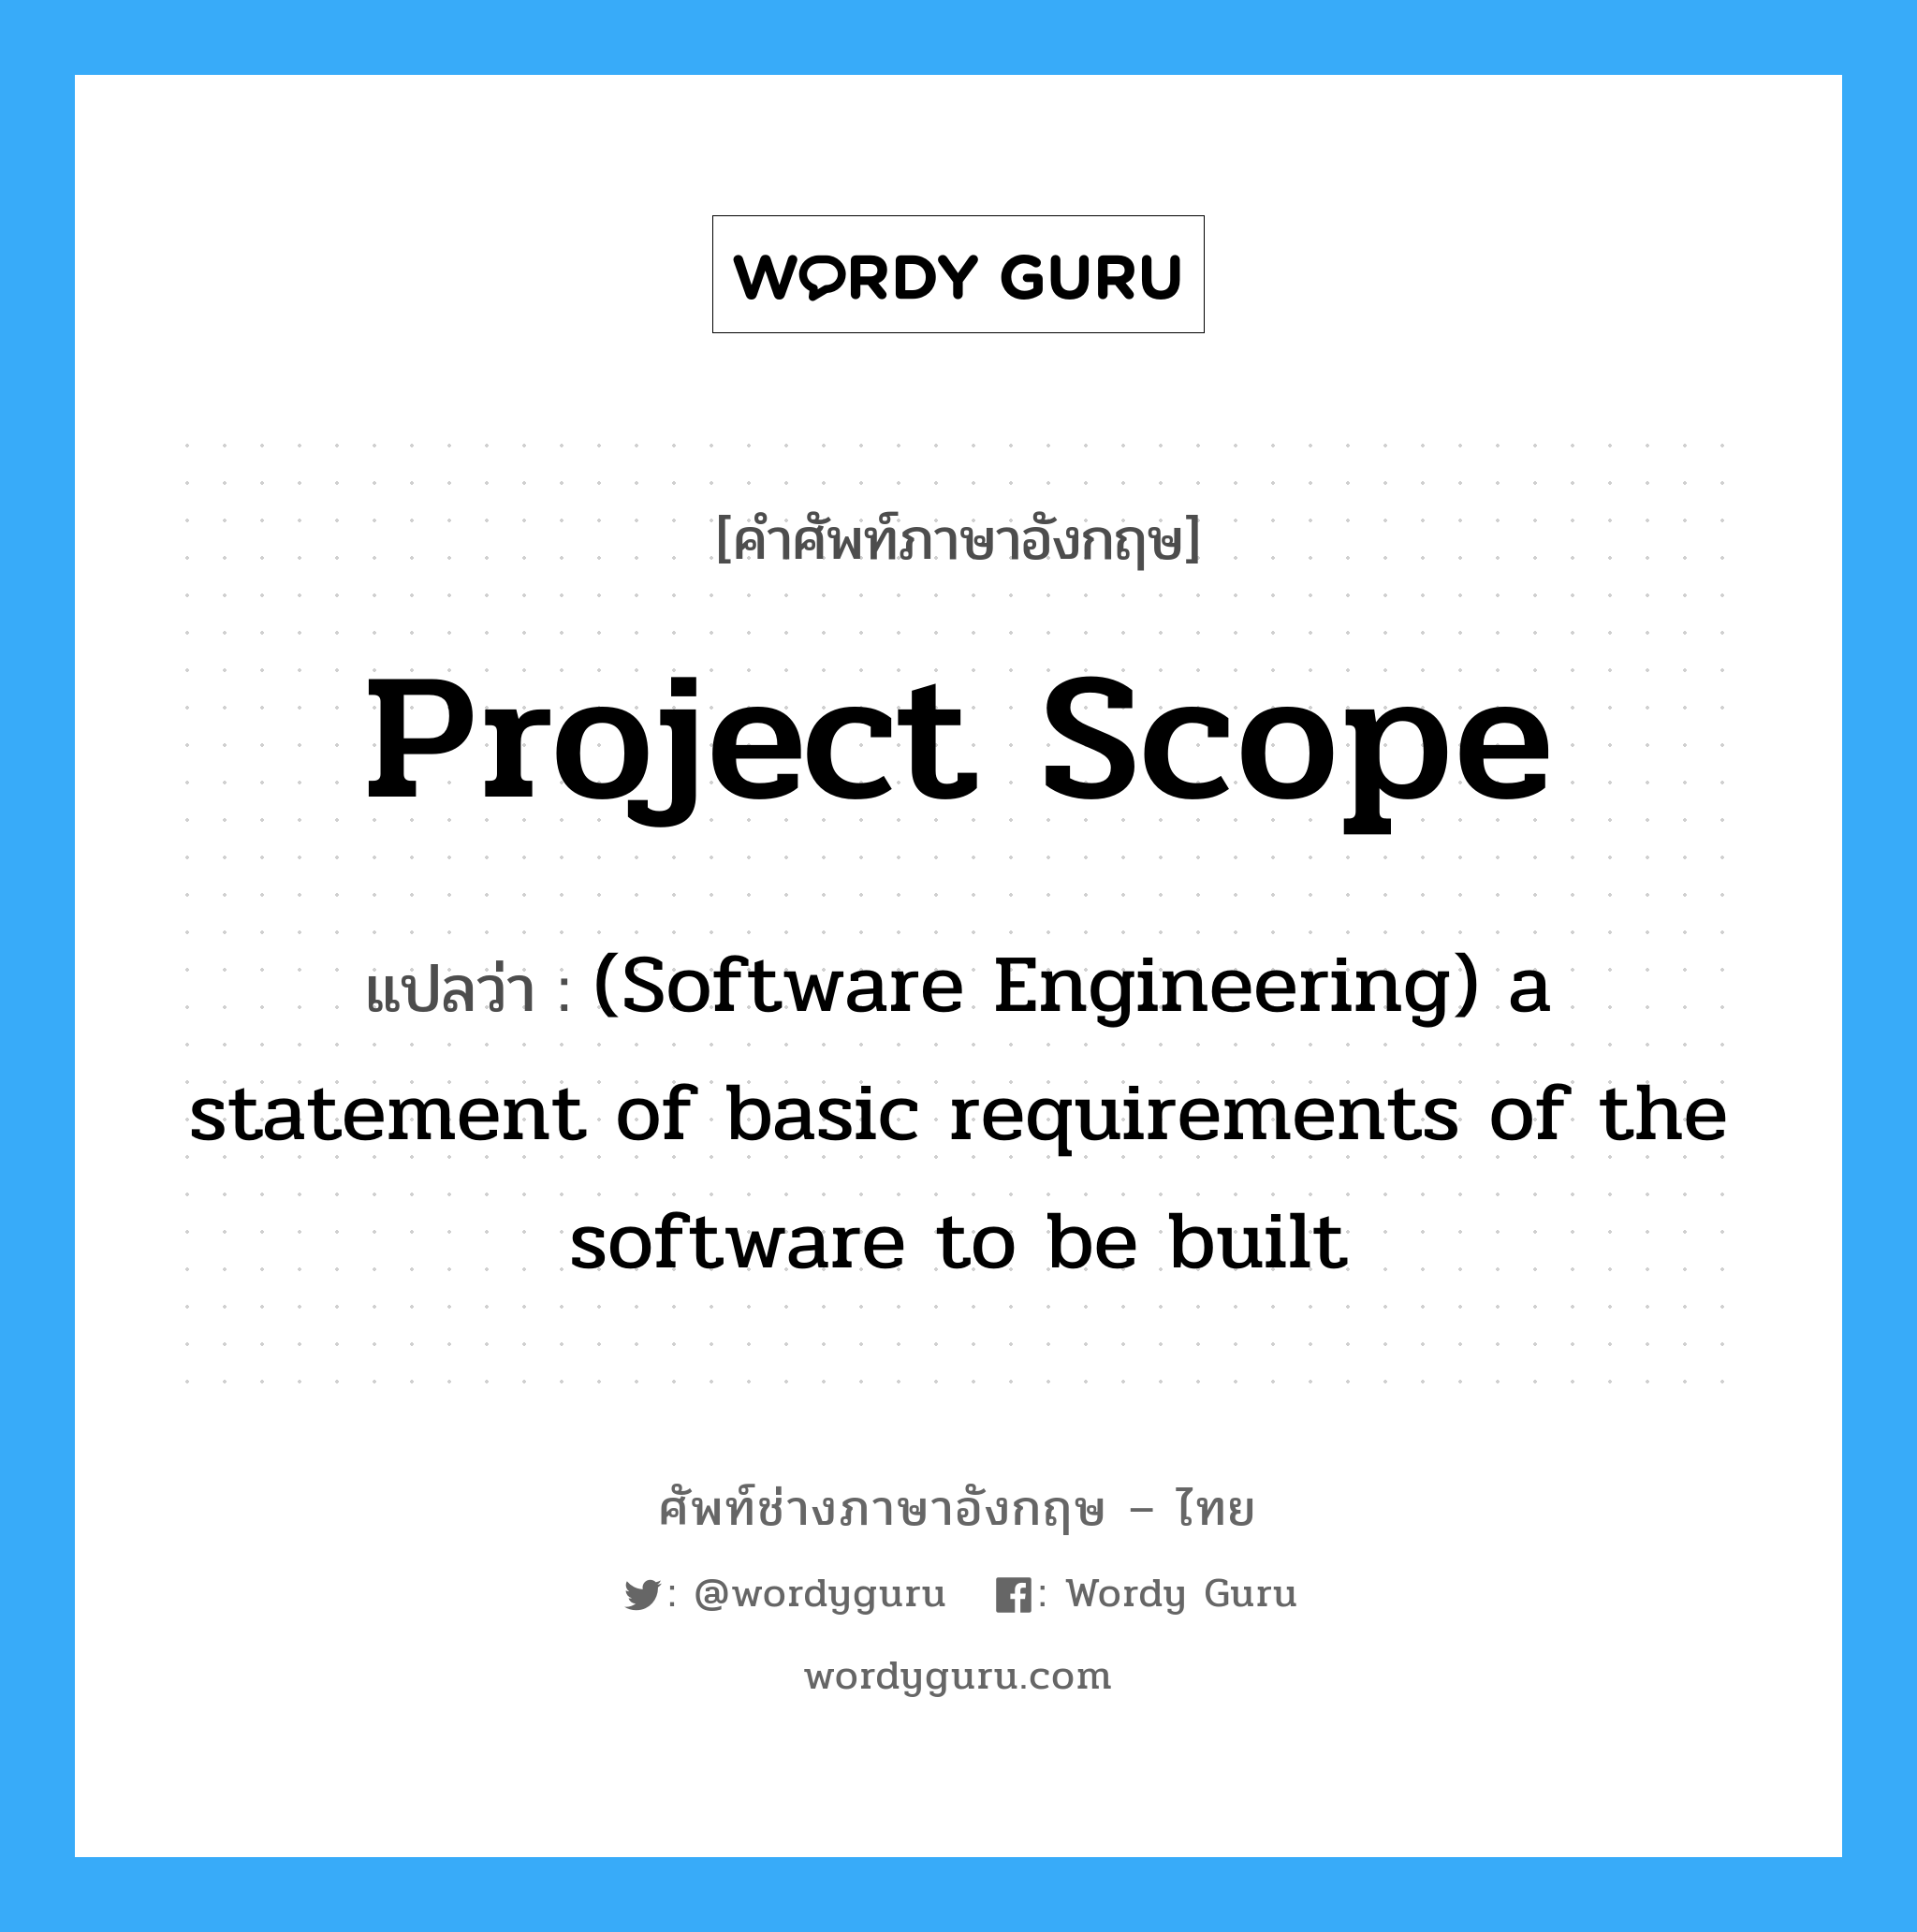 Project scope แปลว่า?, คำศัพท์ช่างภาษาอังกฤษ - ไทย Project scope คำศัพท์ภาษาอังกฤษ Project scope แปลว่า (Software Engineering) a statement of basic requirements of the software to be built